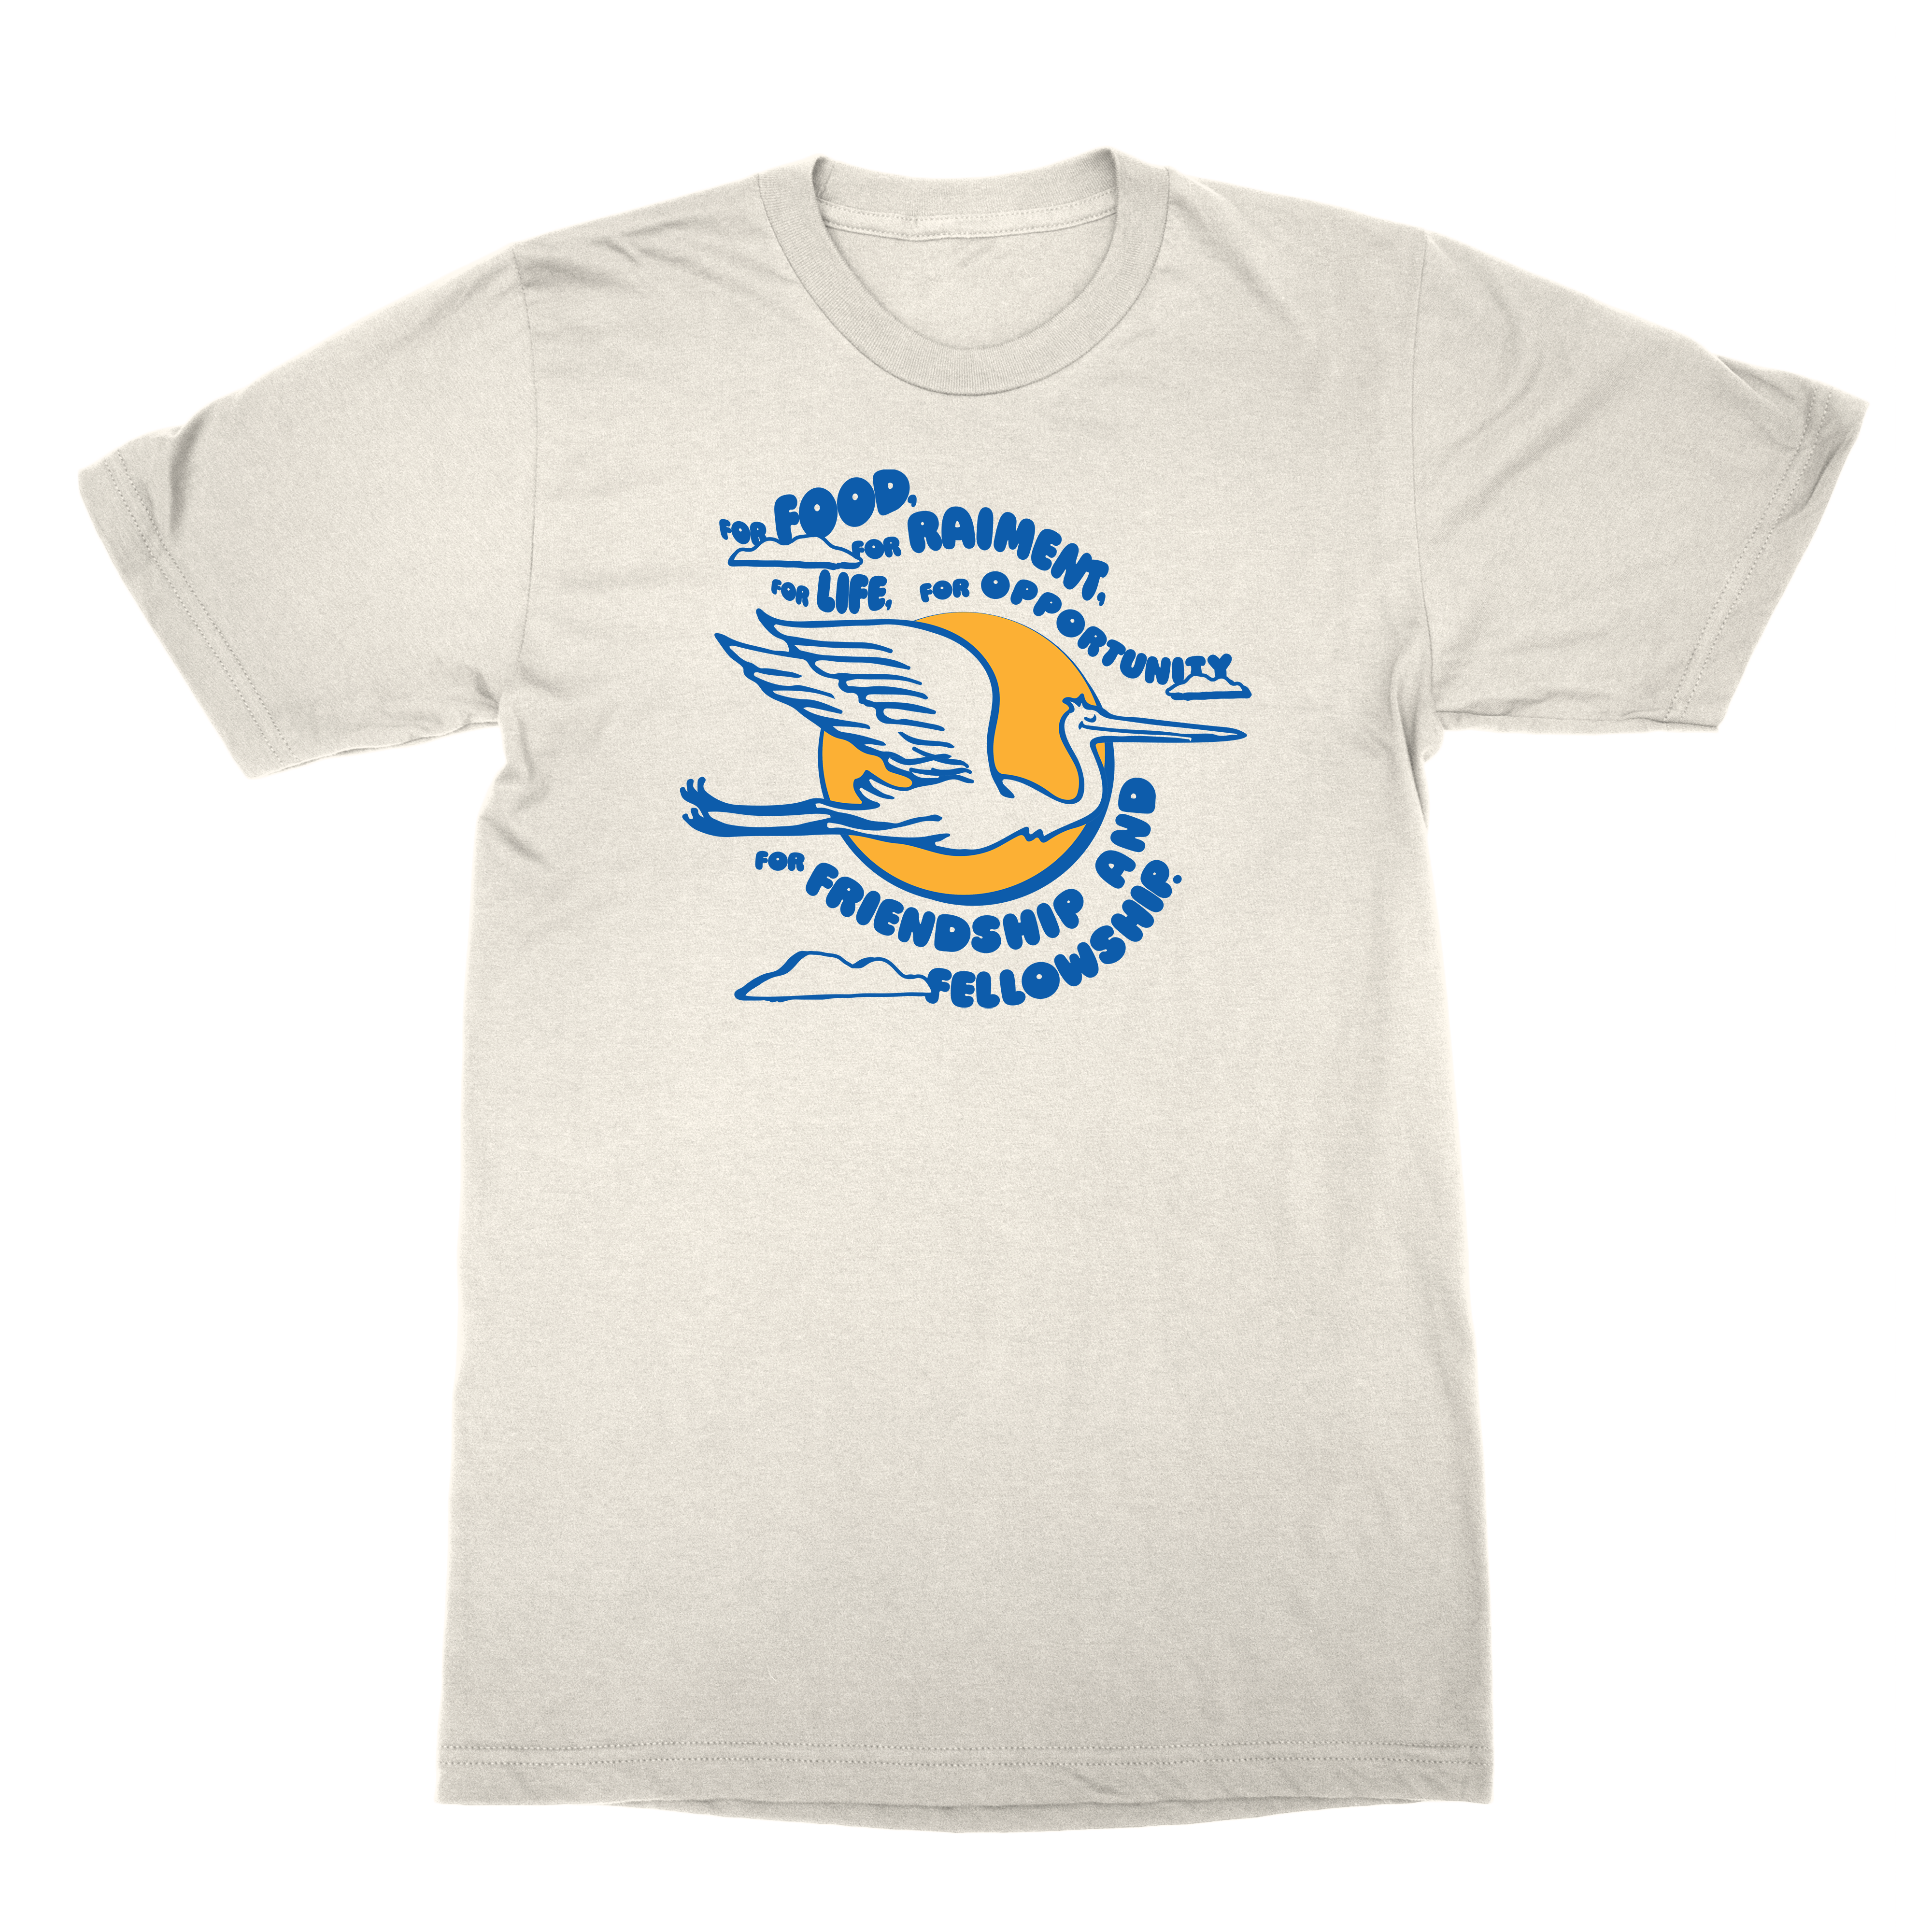 Boy Scouts of America |  Crane and Grace T-Shirt **PREORDER**